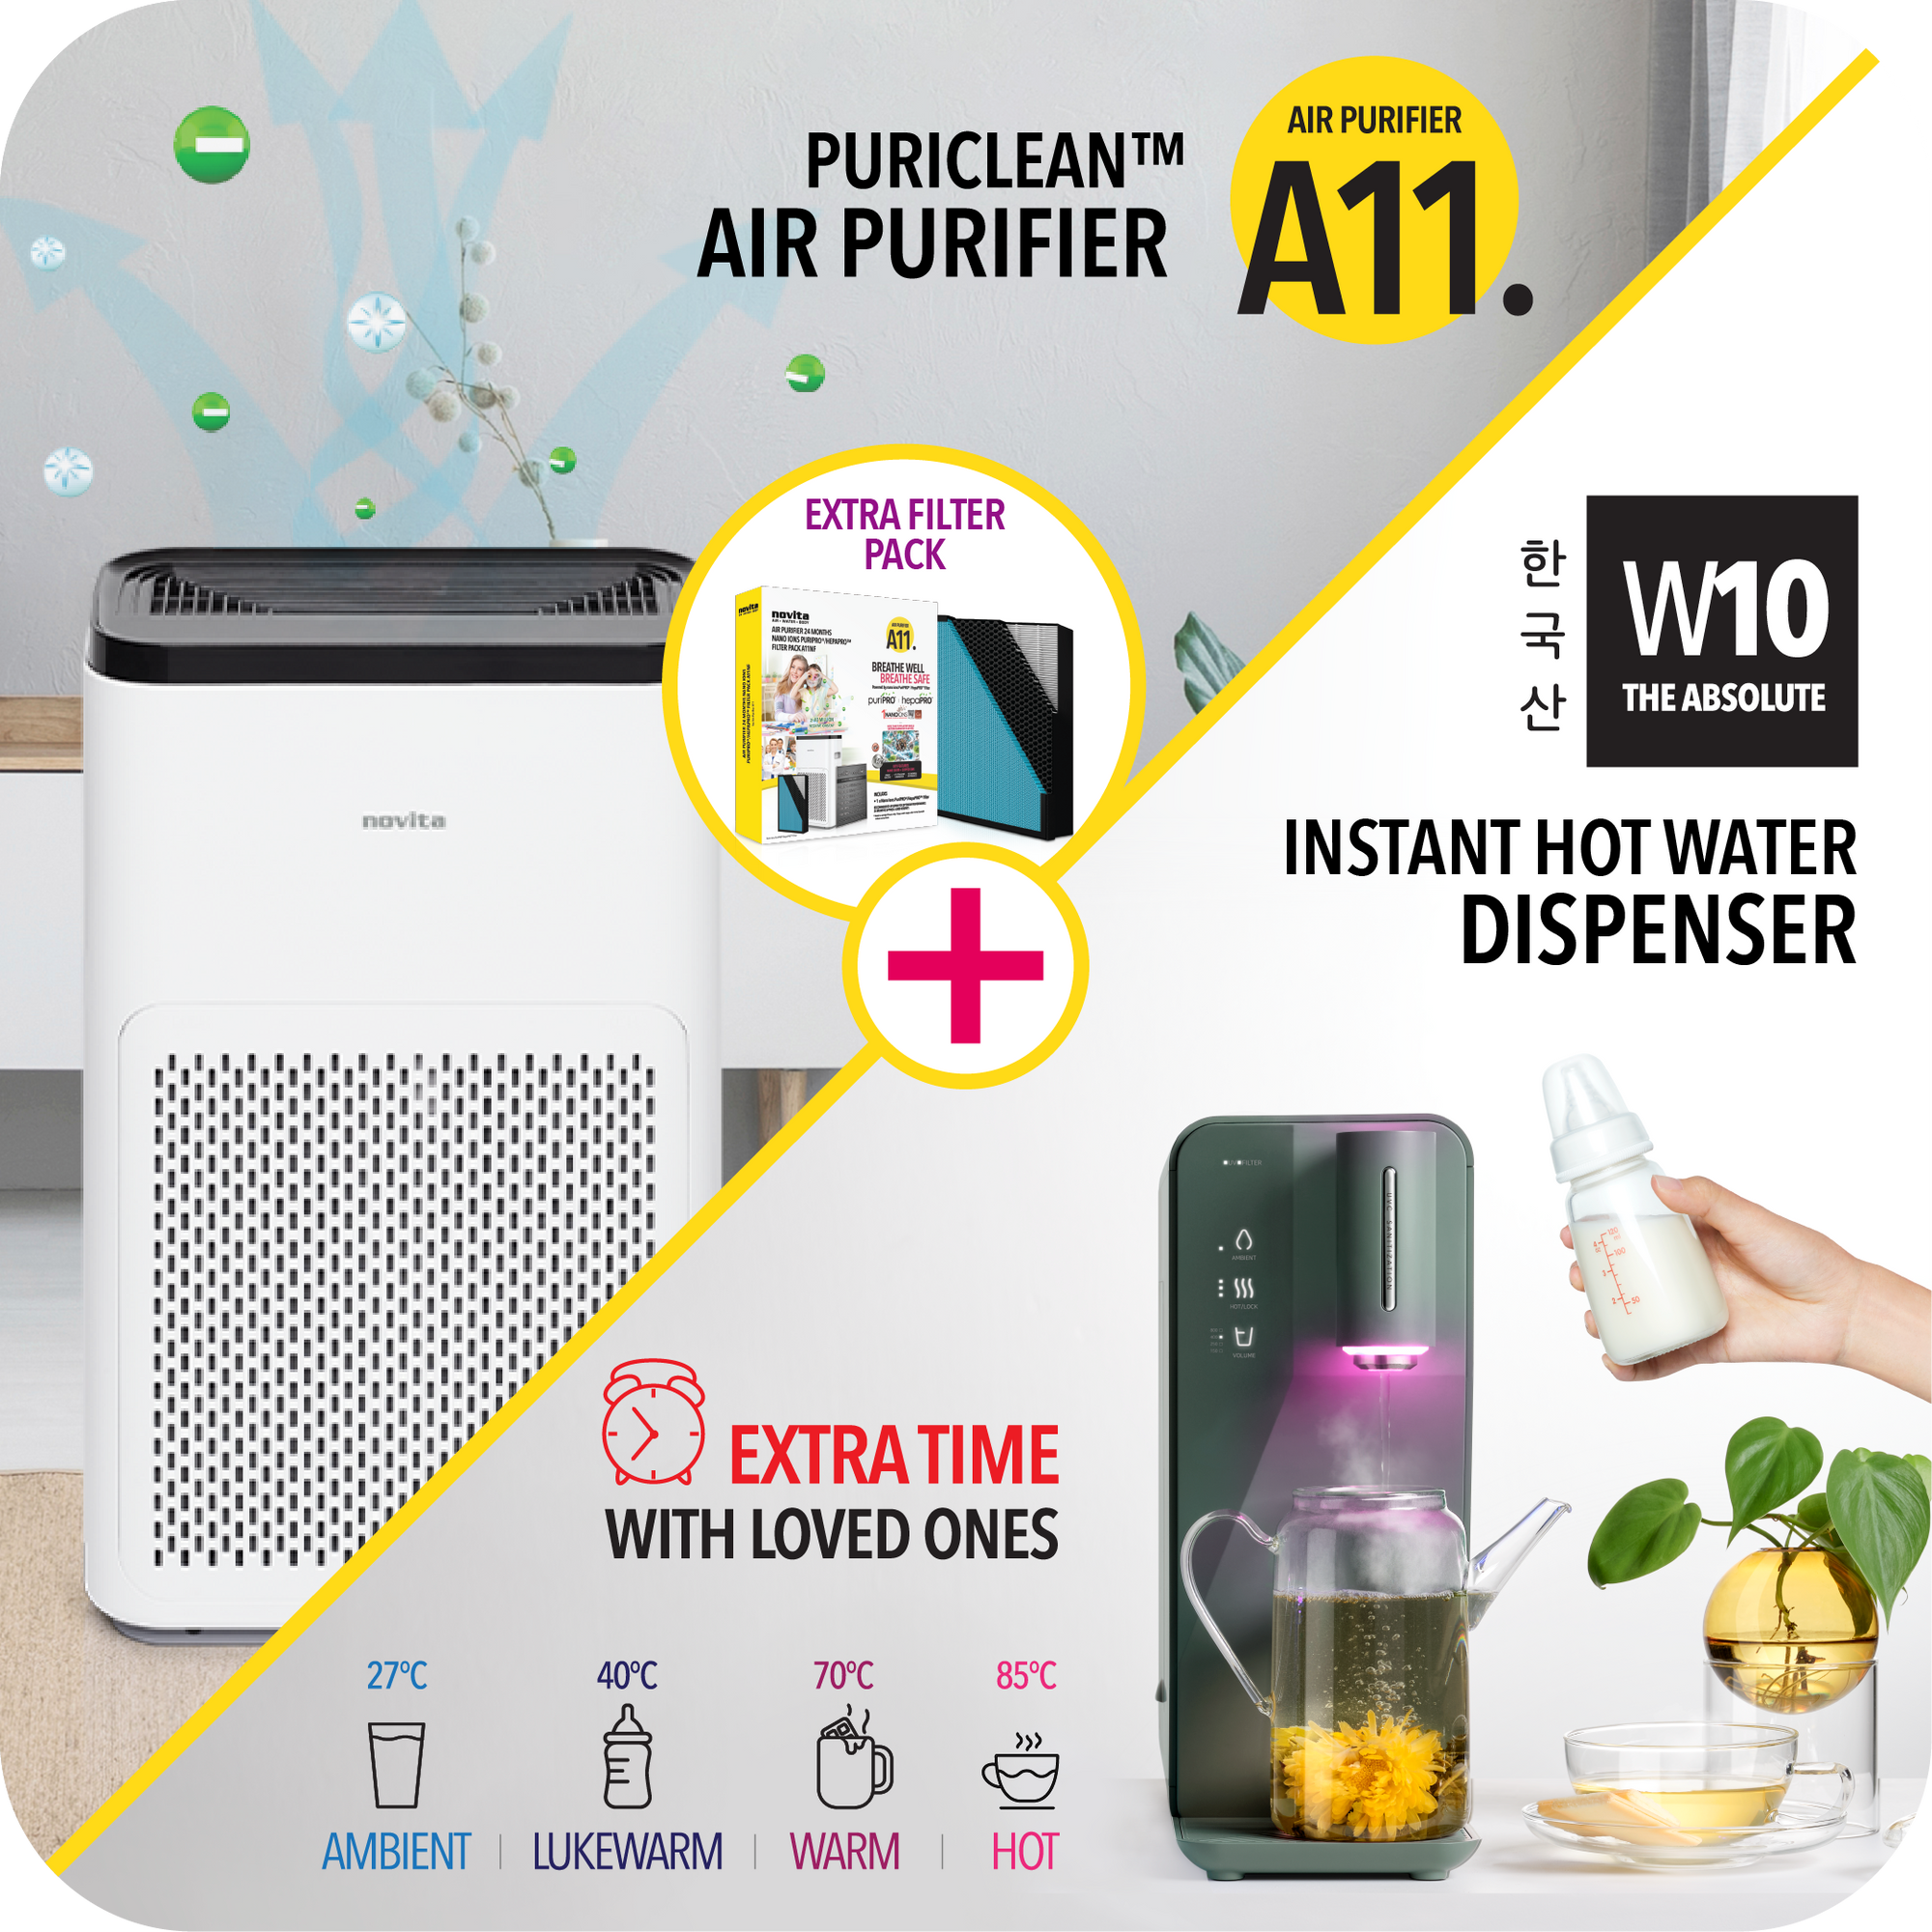 Non-Refundable Pre-Payment for New Homeowners - Bundle Set: Air Purifier A11 with Extra Filter + Instant Hot Water Dispenser W10